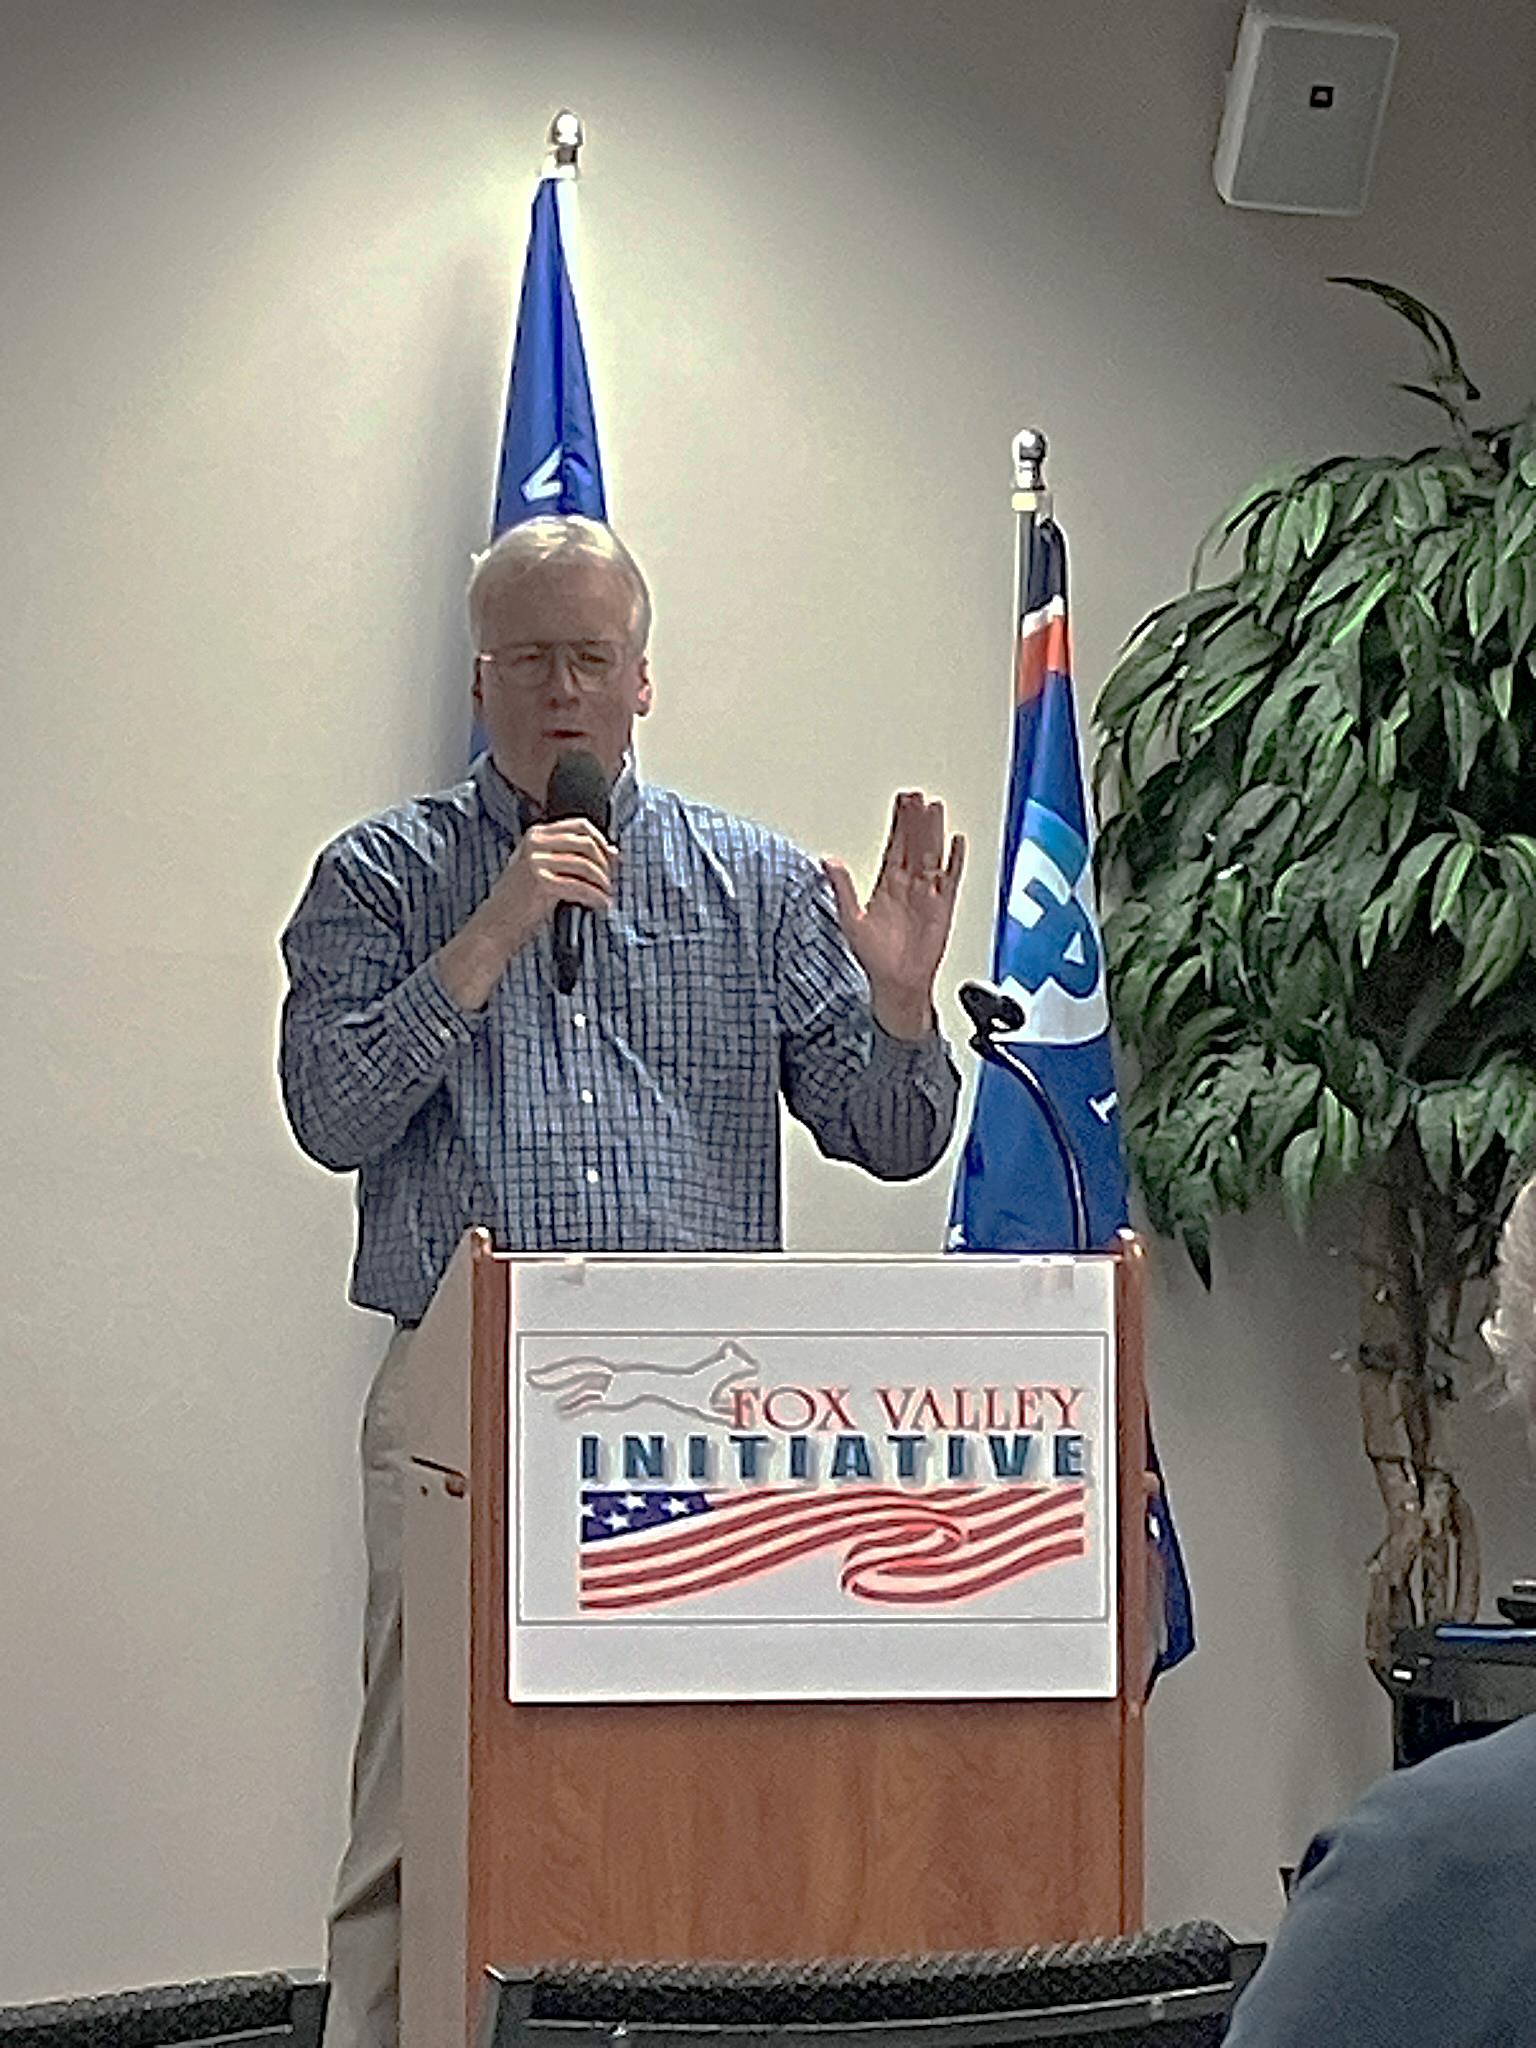 John Pudner, president of Take Back Our Republic Action Fund, spoke at the November 6, 2023 meeting of Fox Valley Initiative in Appleton, Wisconsin.